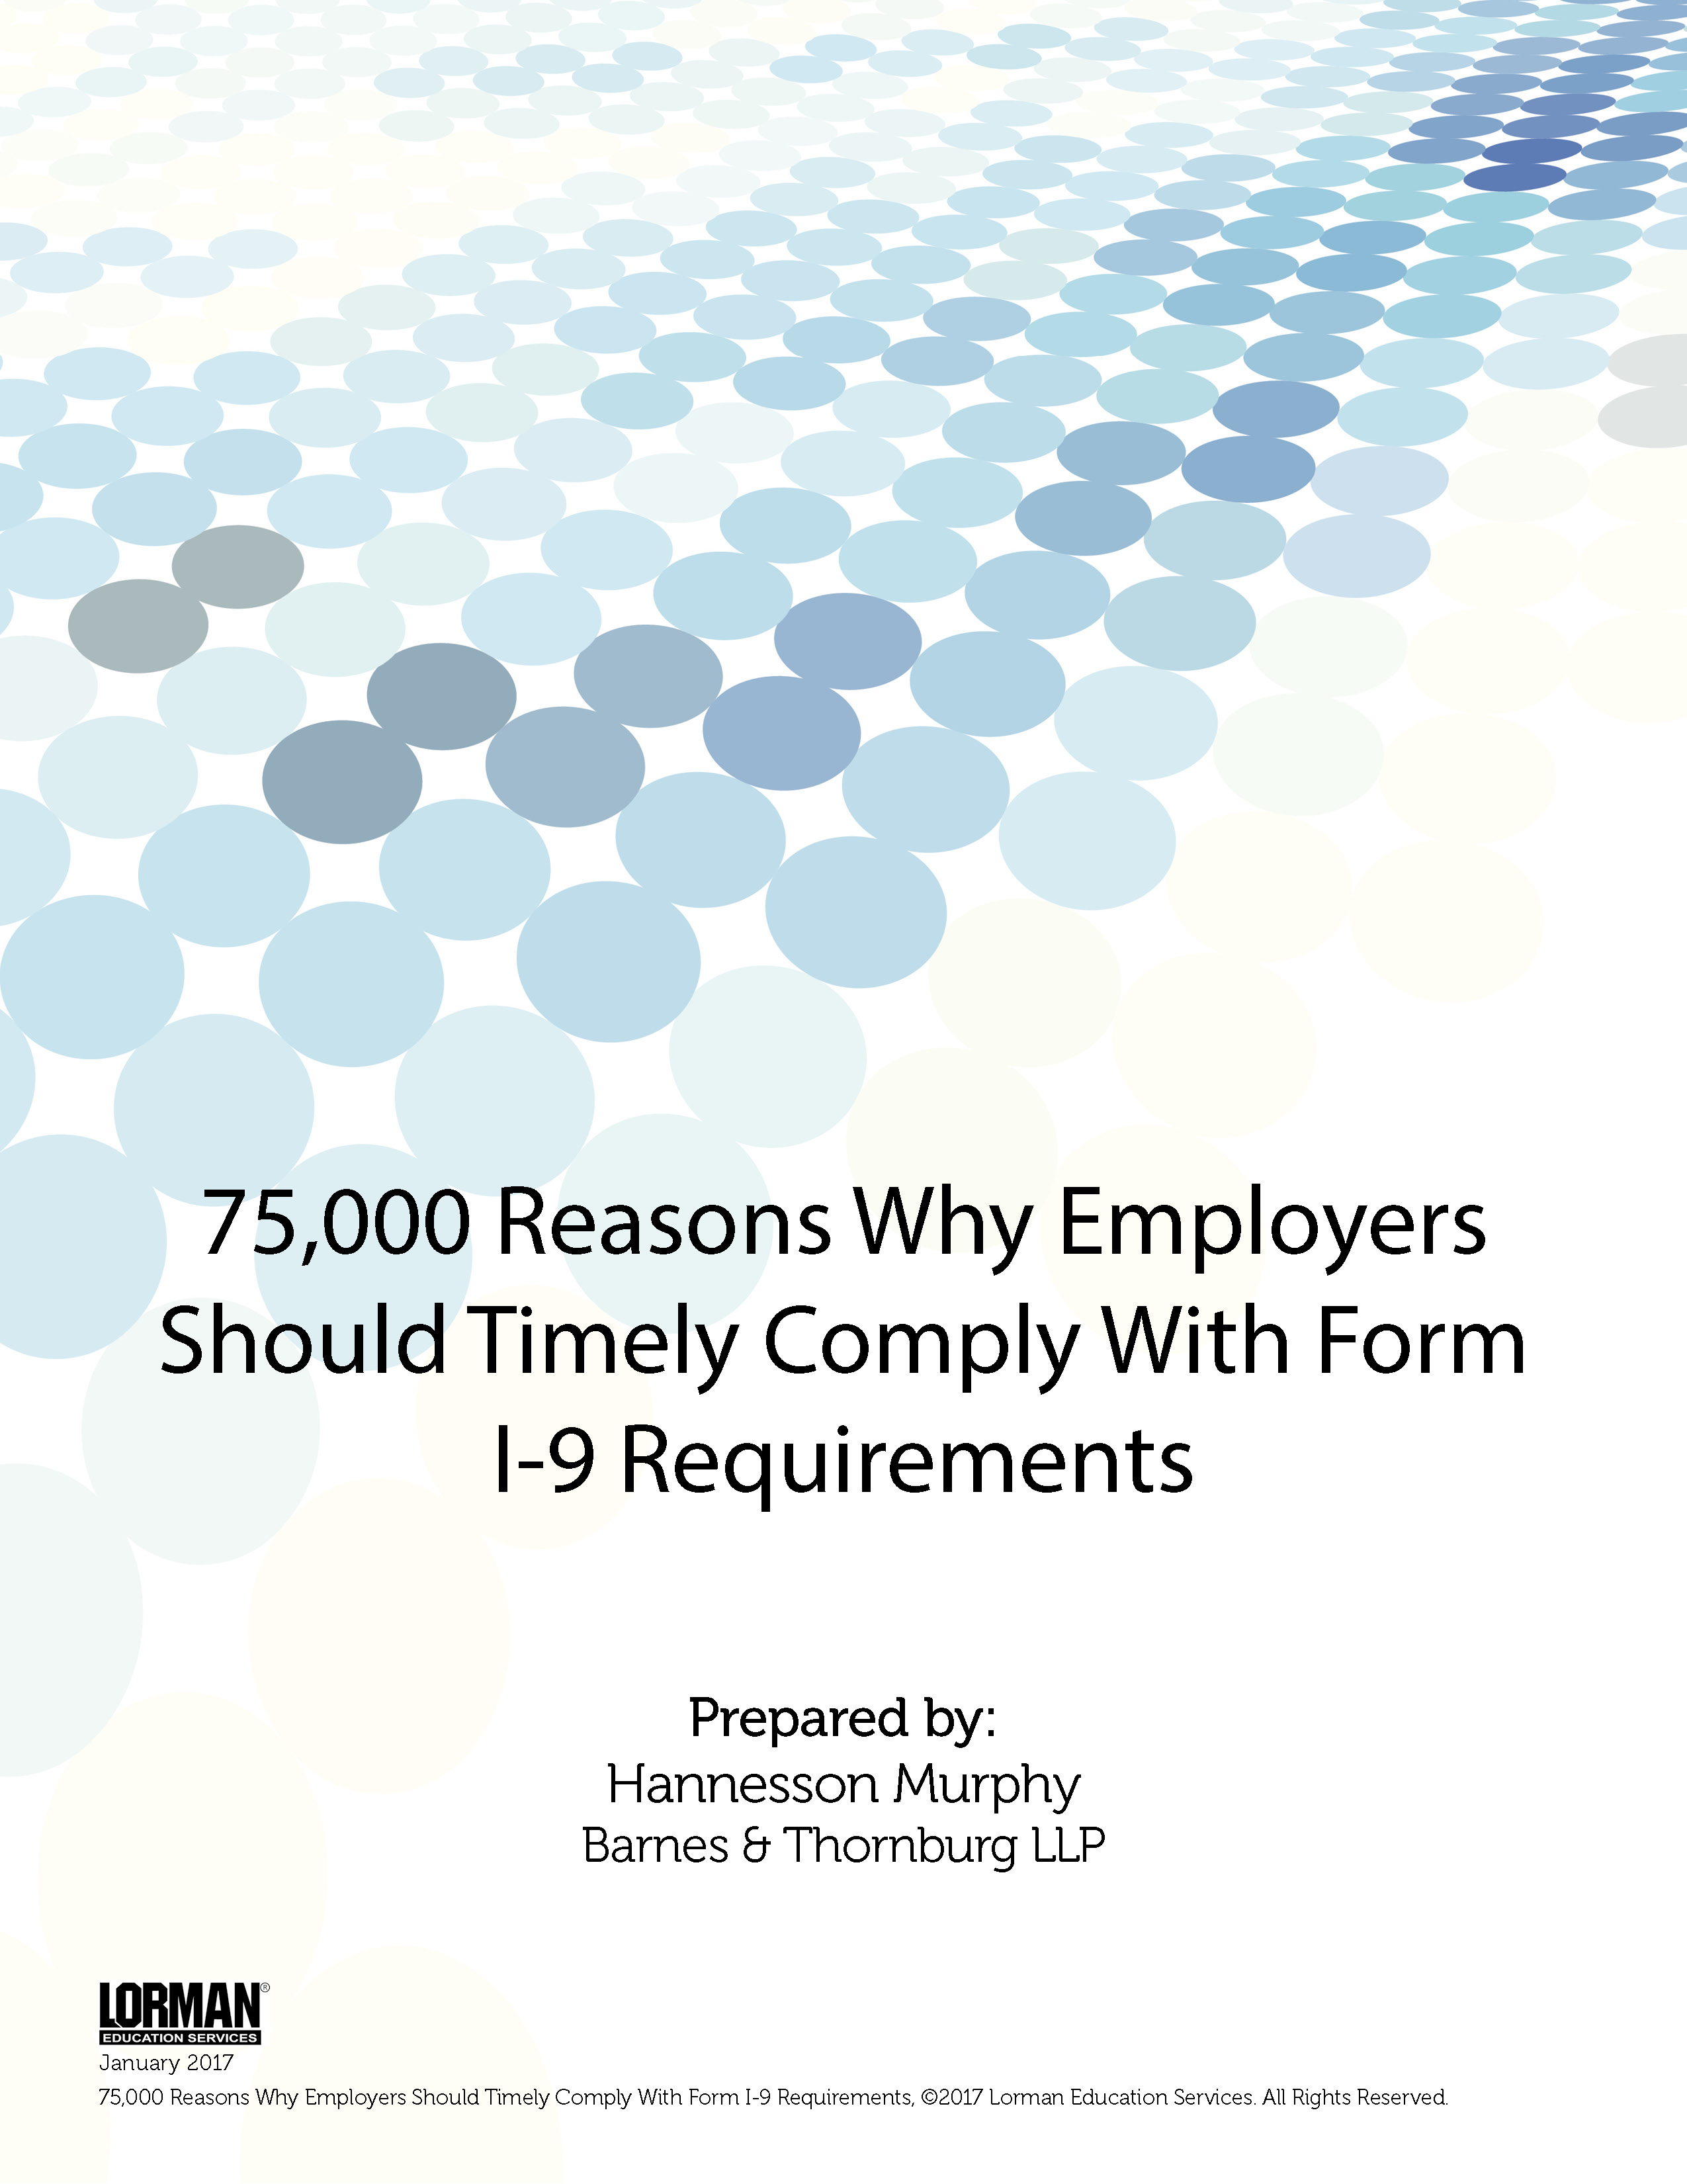 75,000 Reasons Why Employers Should Timely Comply With Form I-9 Requirements